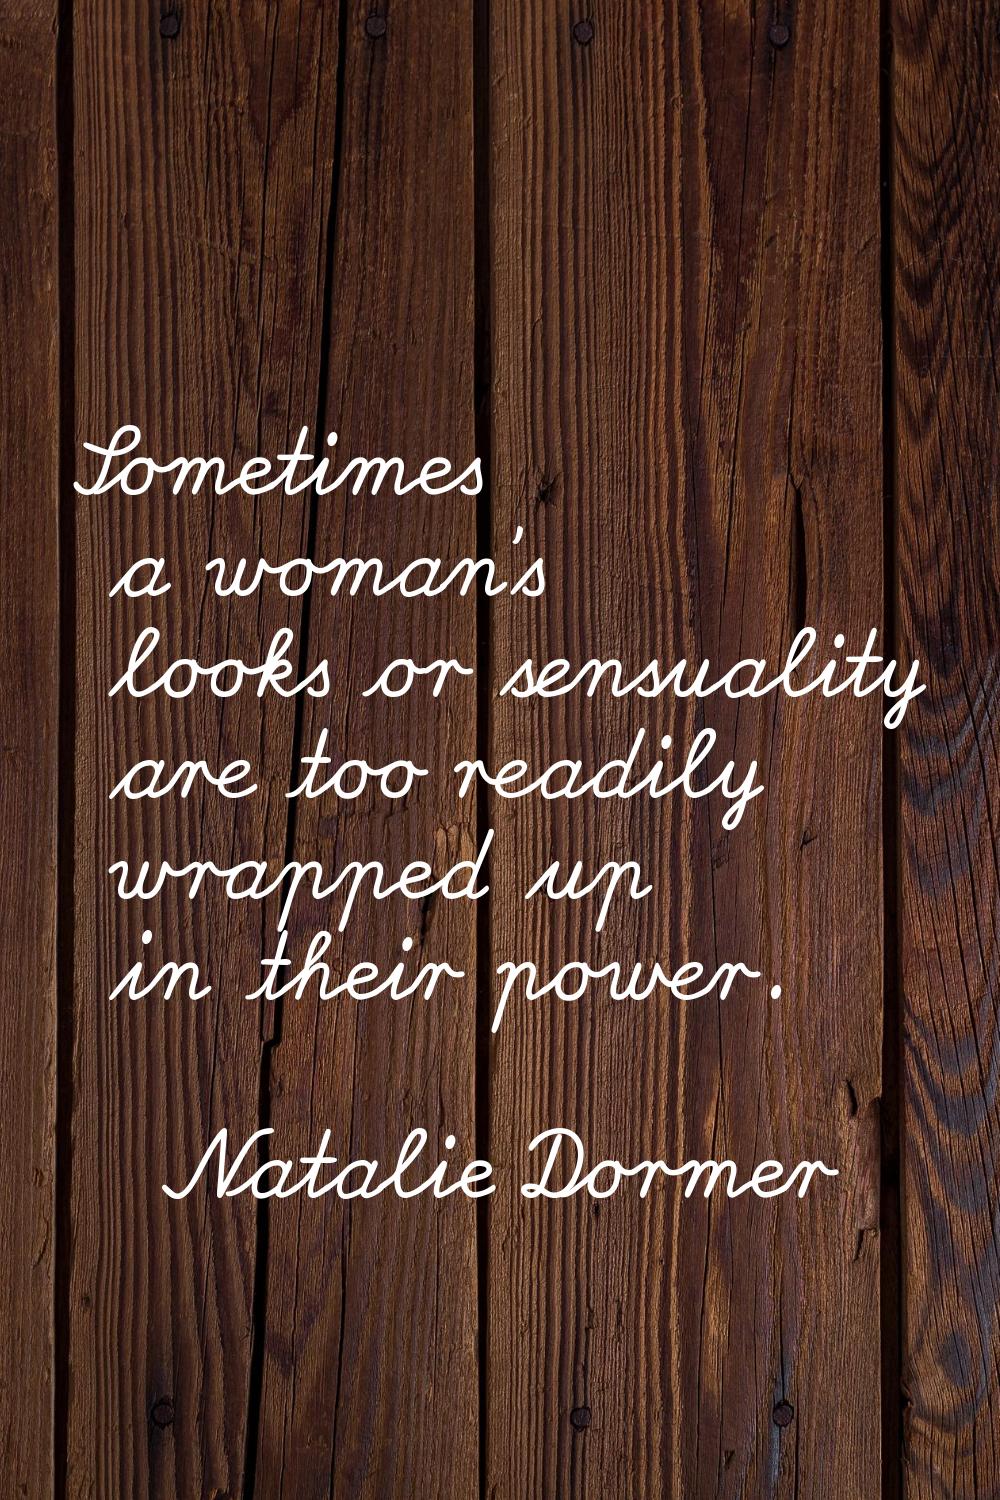 Sometimes a woman's looks or sensuality are too readily wrapped up in their power.